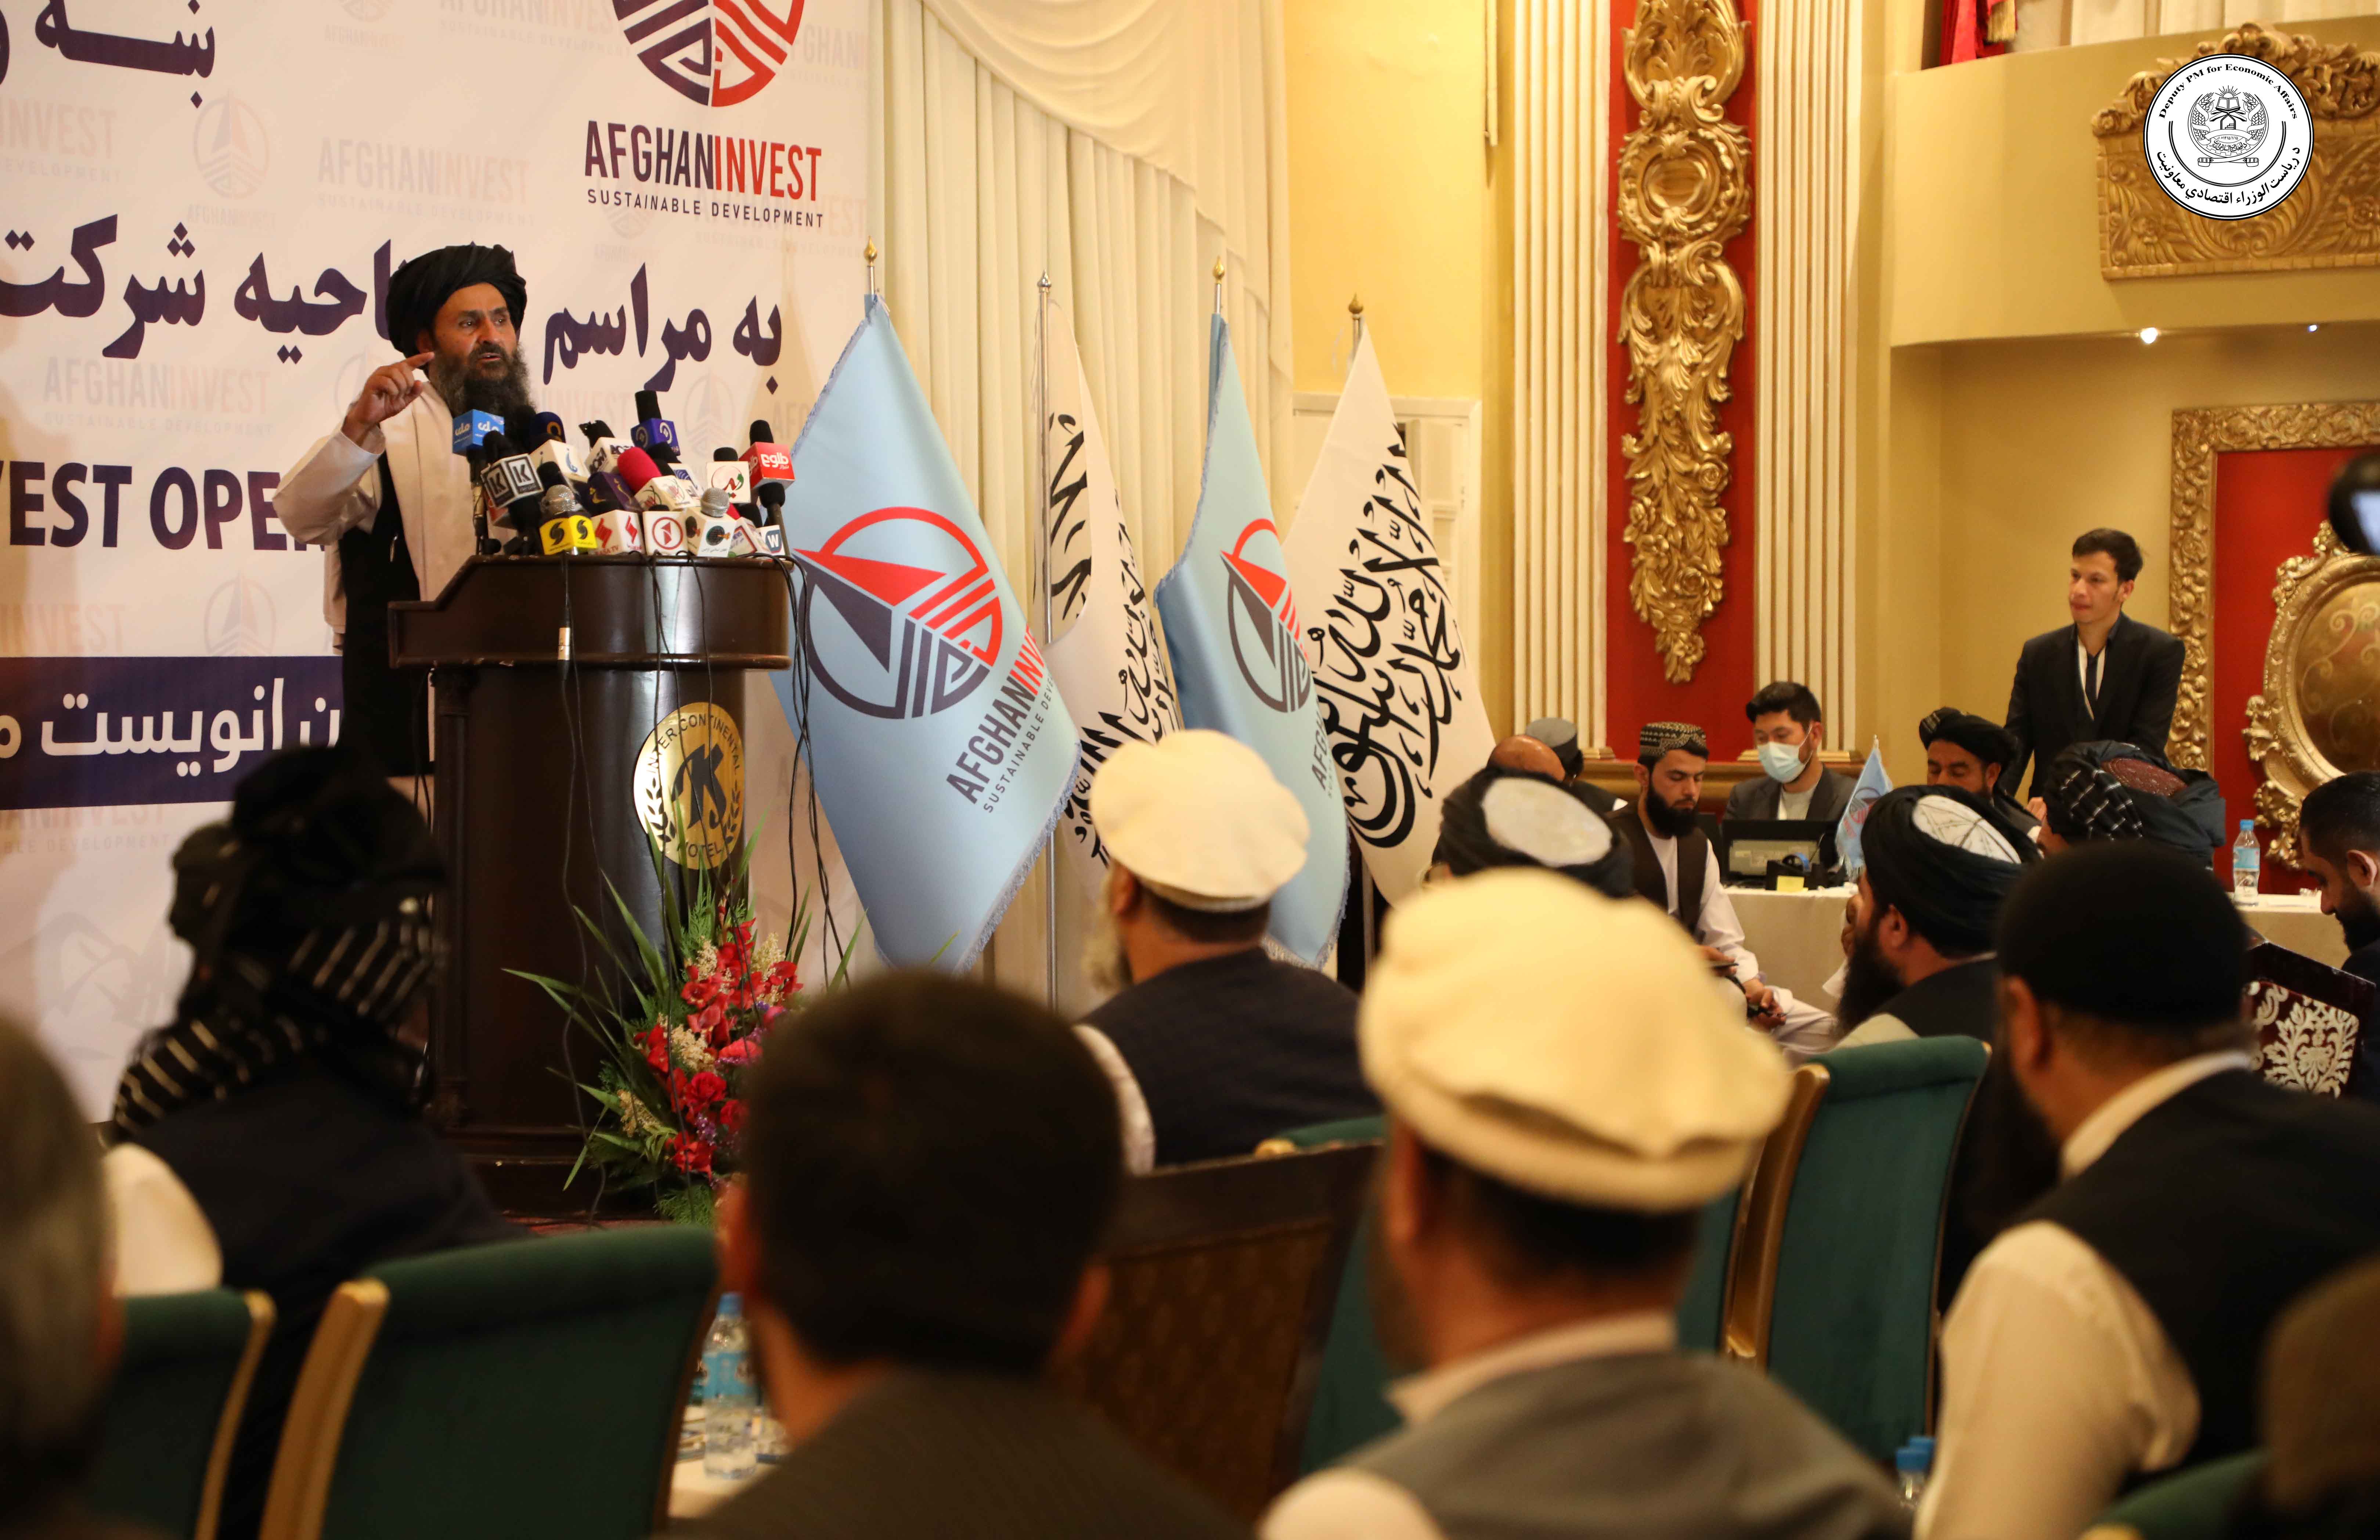 Afghan Invest Company was launched by the Deputy Prime Minister for Economic Affairs